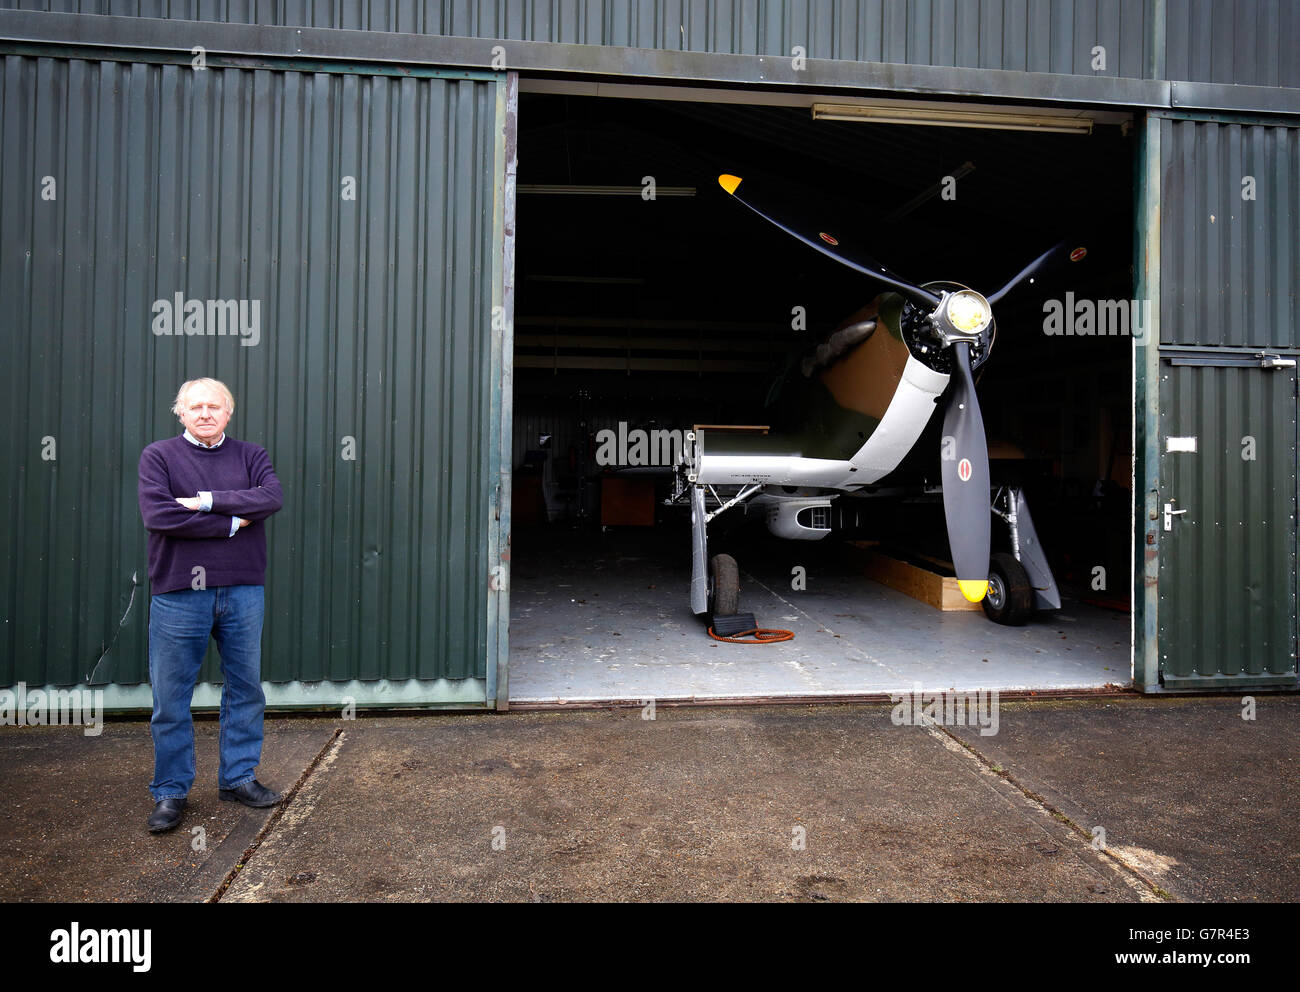 Previously unissued photo dated 18/03/15 of Tony Eitheridge from Hawker Restorations Ltd next to a Hawker Hurricane Mk 1 in his Suffolk workshop, as the plane which was shot down in September 1940, is undergoing a full restoration to coincide with the 75th anniversary of the Battle of Britain this year. Stock Photo